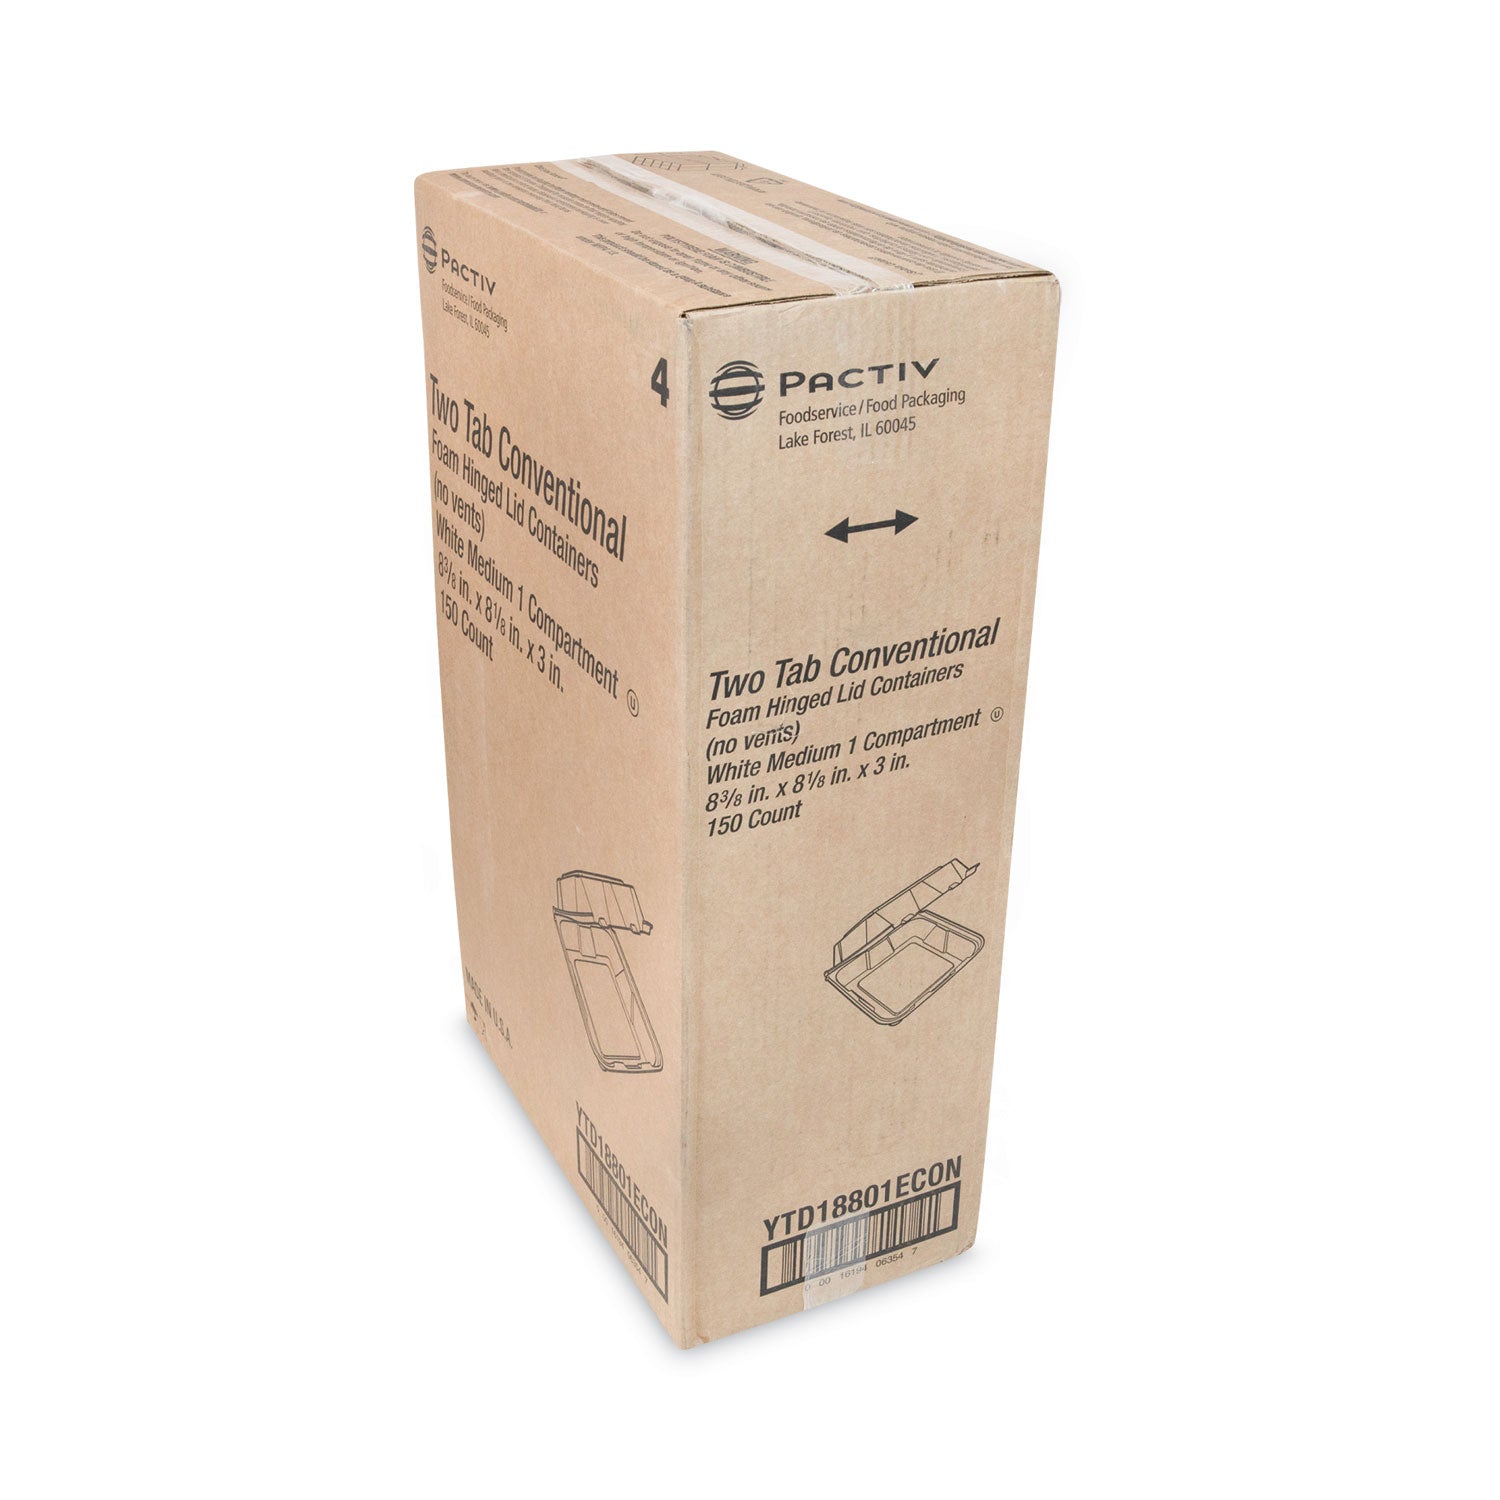 vented-foam-hinged-lid-container-dual-tab-lock-economy-842-x-815-x-3-white-150-carton_pctytd18801econ - 3